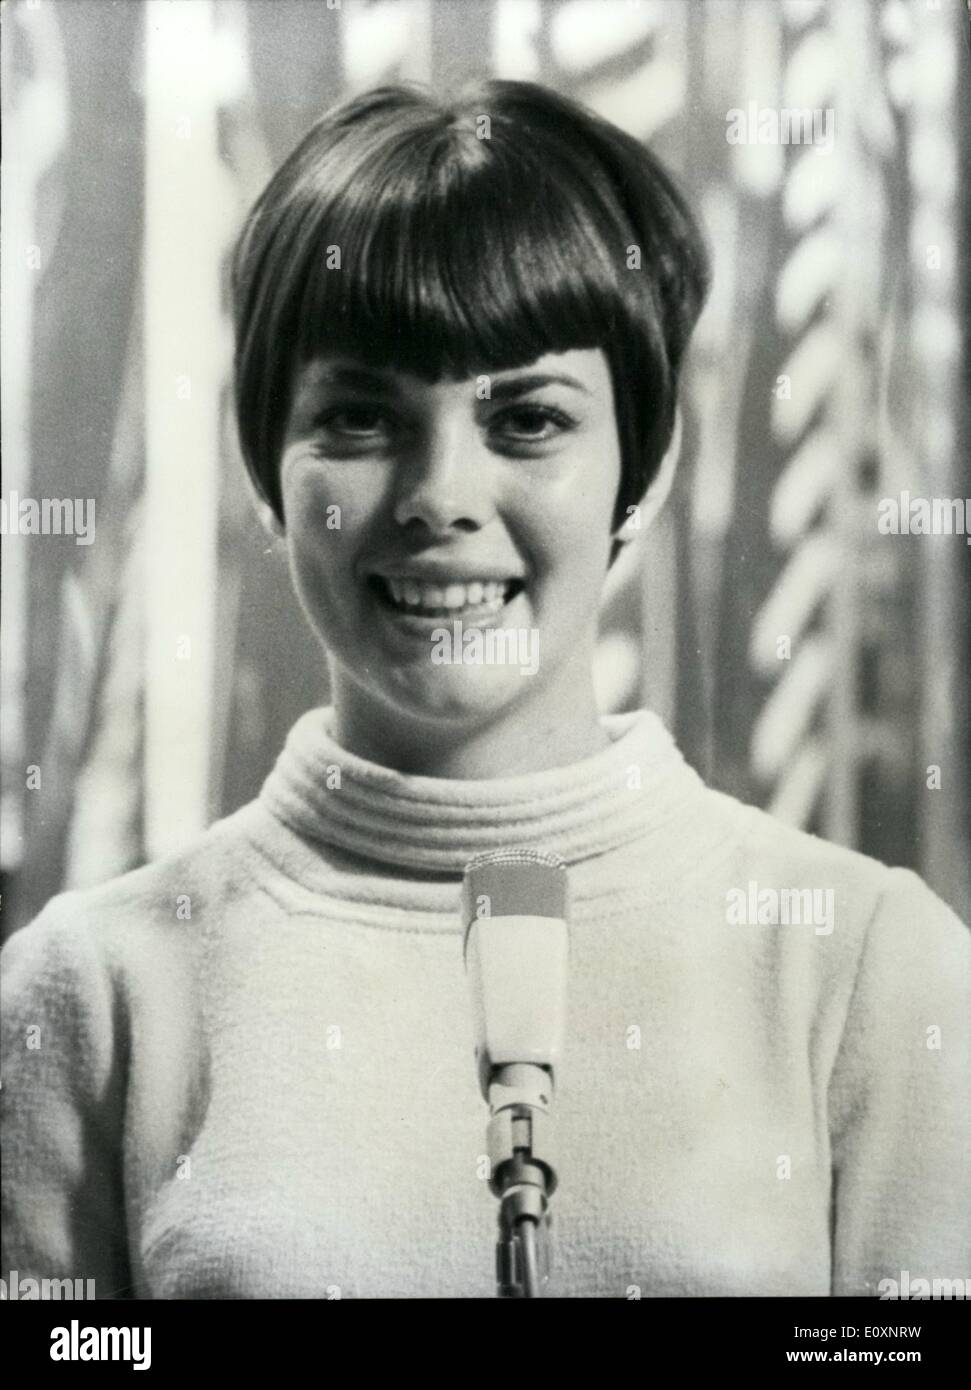 Jul. 07, 1967 - Mireille Mathieu 21: Mireille Mathieu, the famous young singer proclaimed as the new Edith Piaf will be celebrating her coming of age in two days. Arecent picture of Mireille Mathieu. Stock Photo